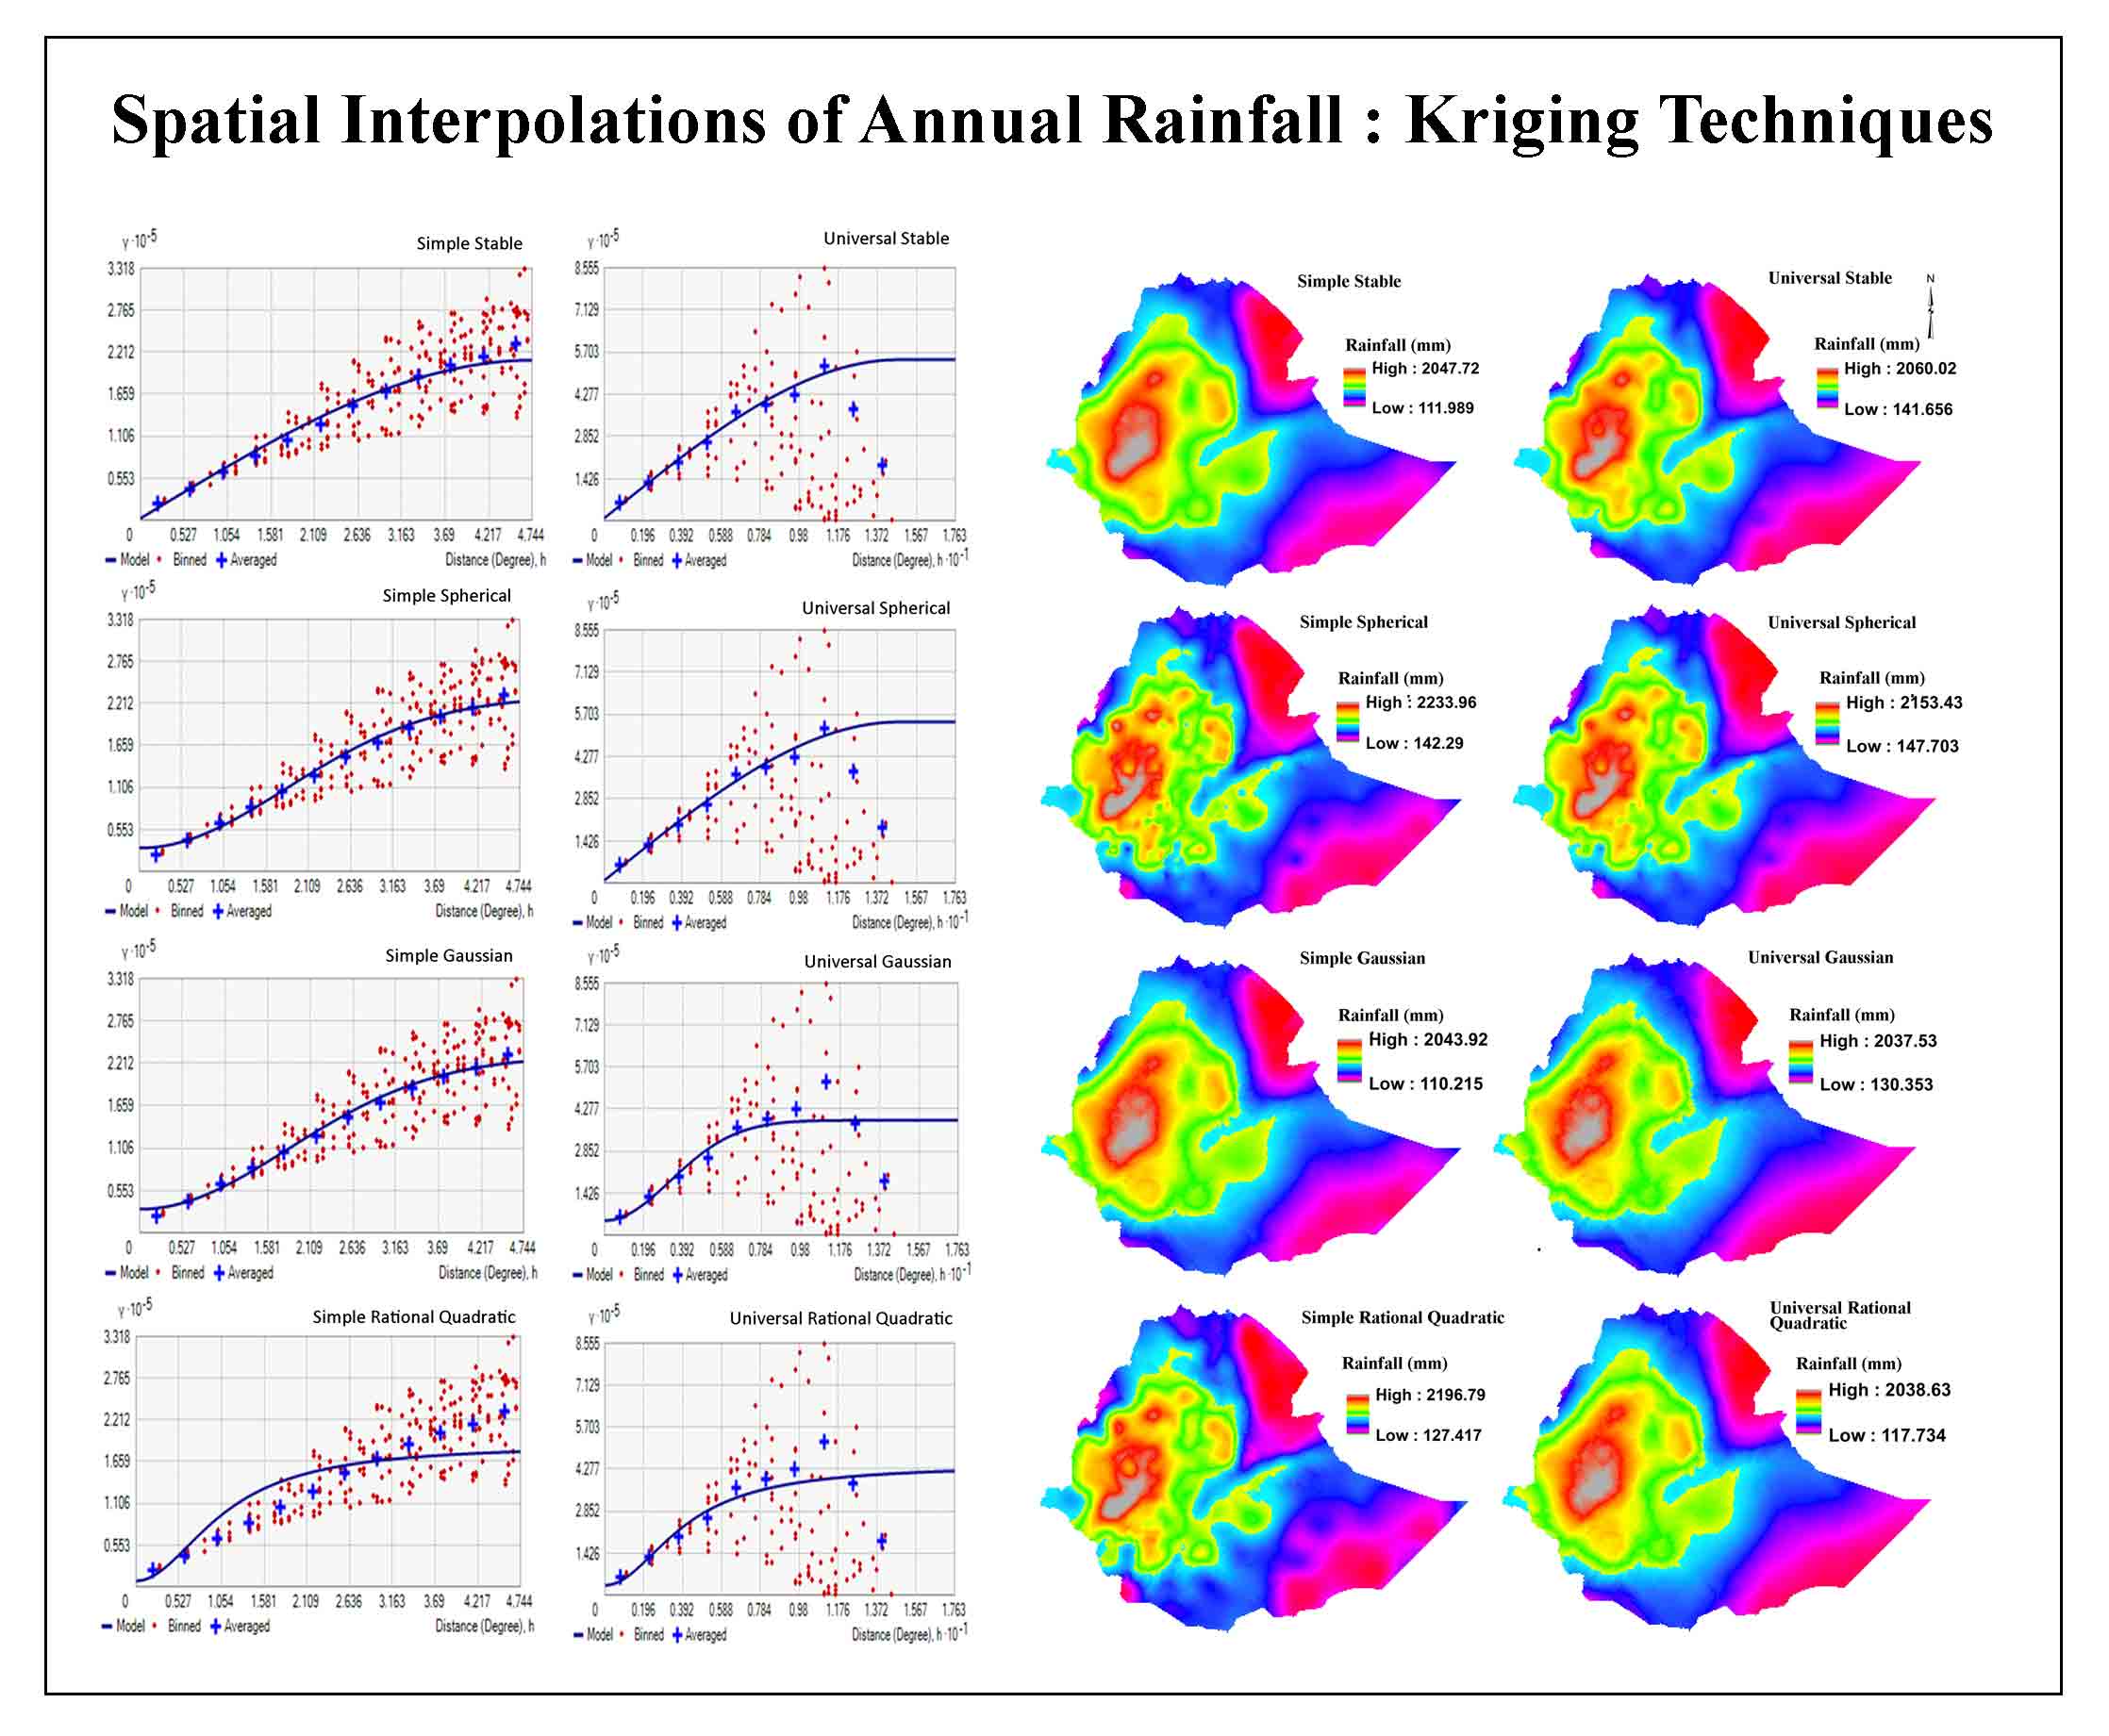 Spatial Interpolations of Annual Rainfall in Ethiopia Using Simple and Universal Kriging Techniques